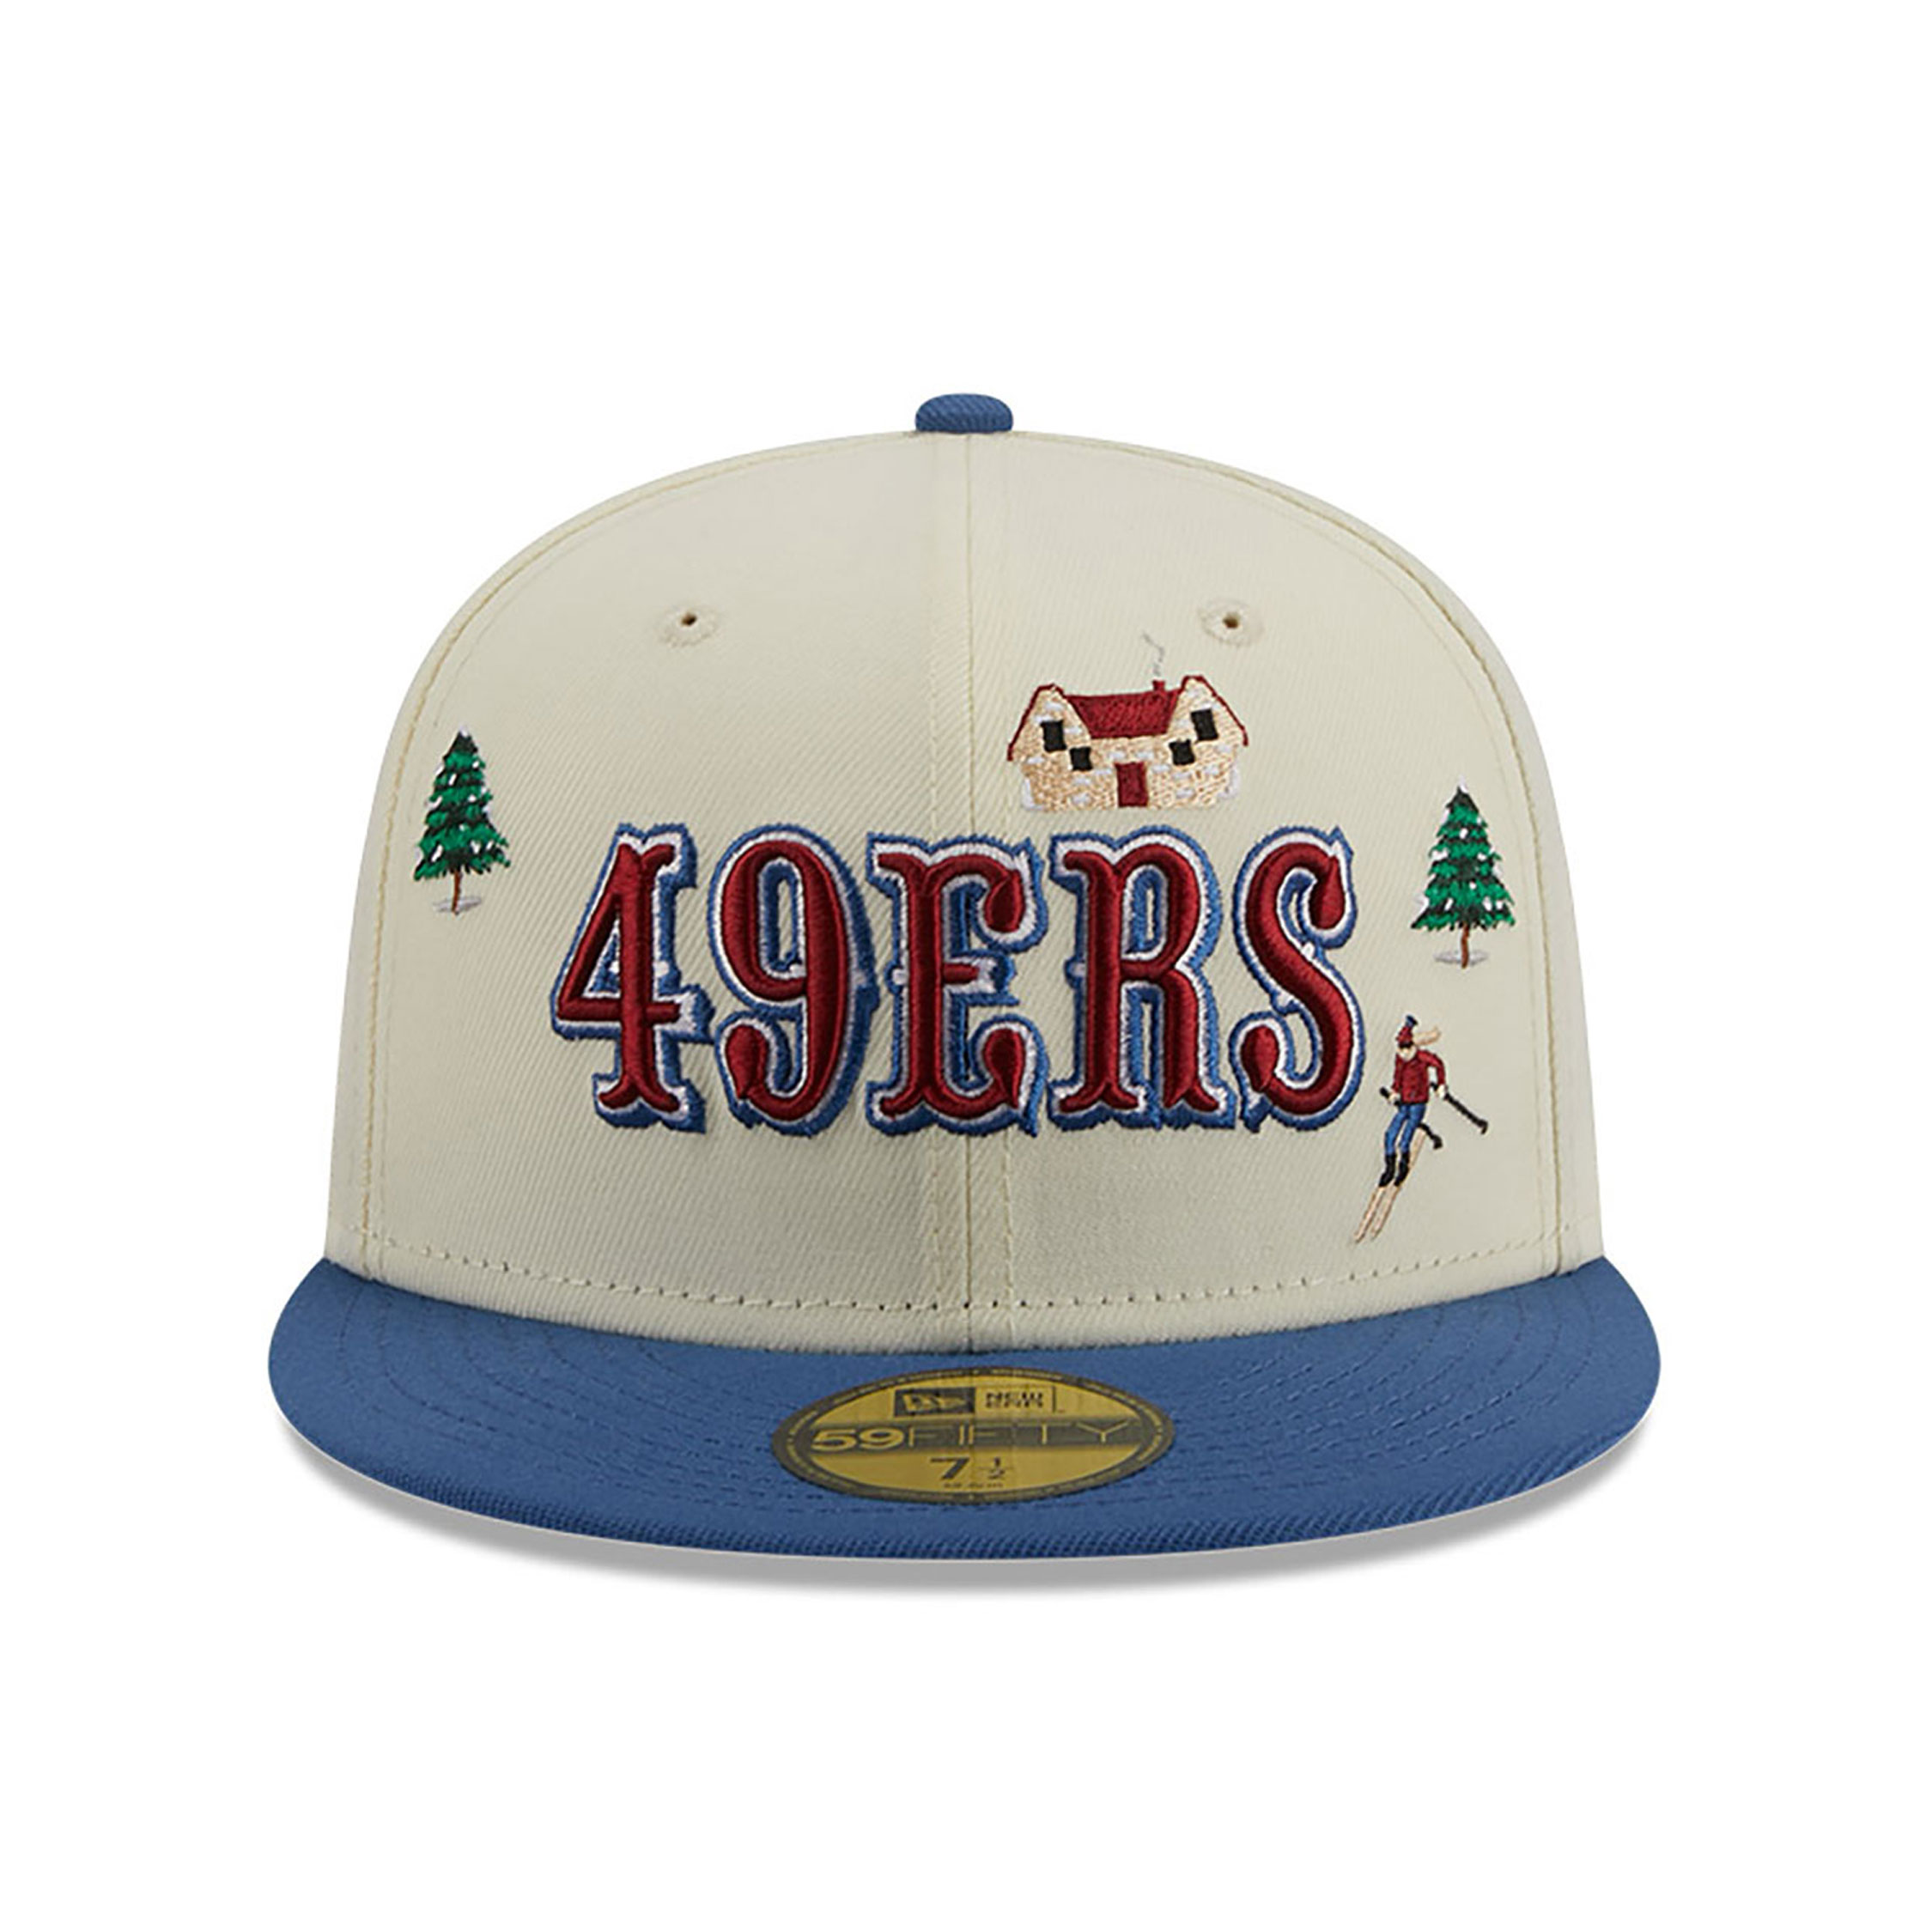 San Francisco 49ers Snowboard Off White 59FIFTY Fitted Cap